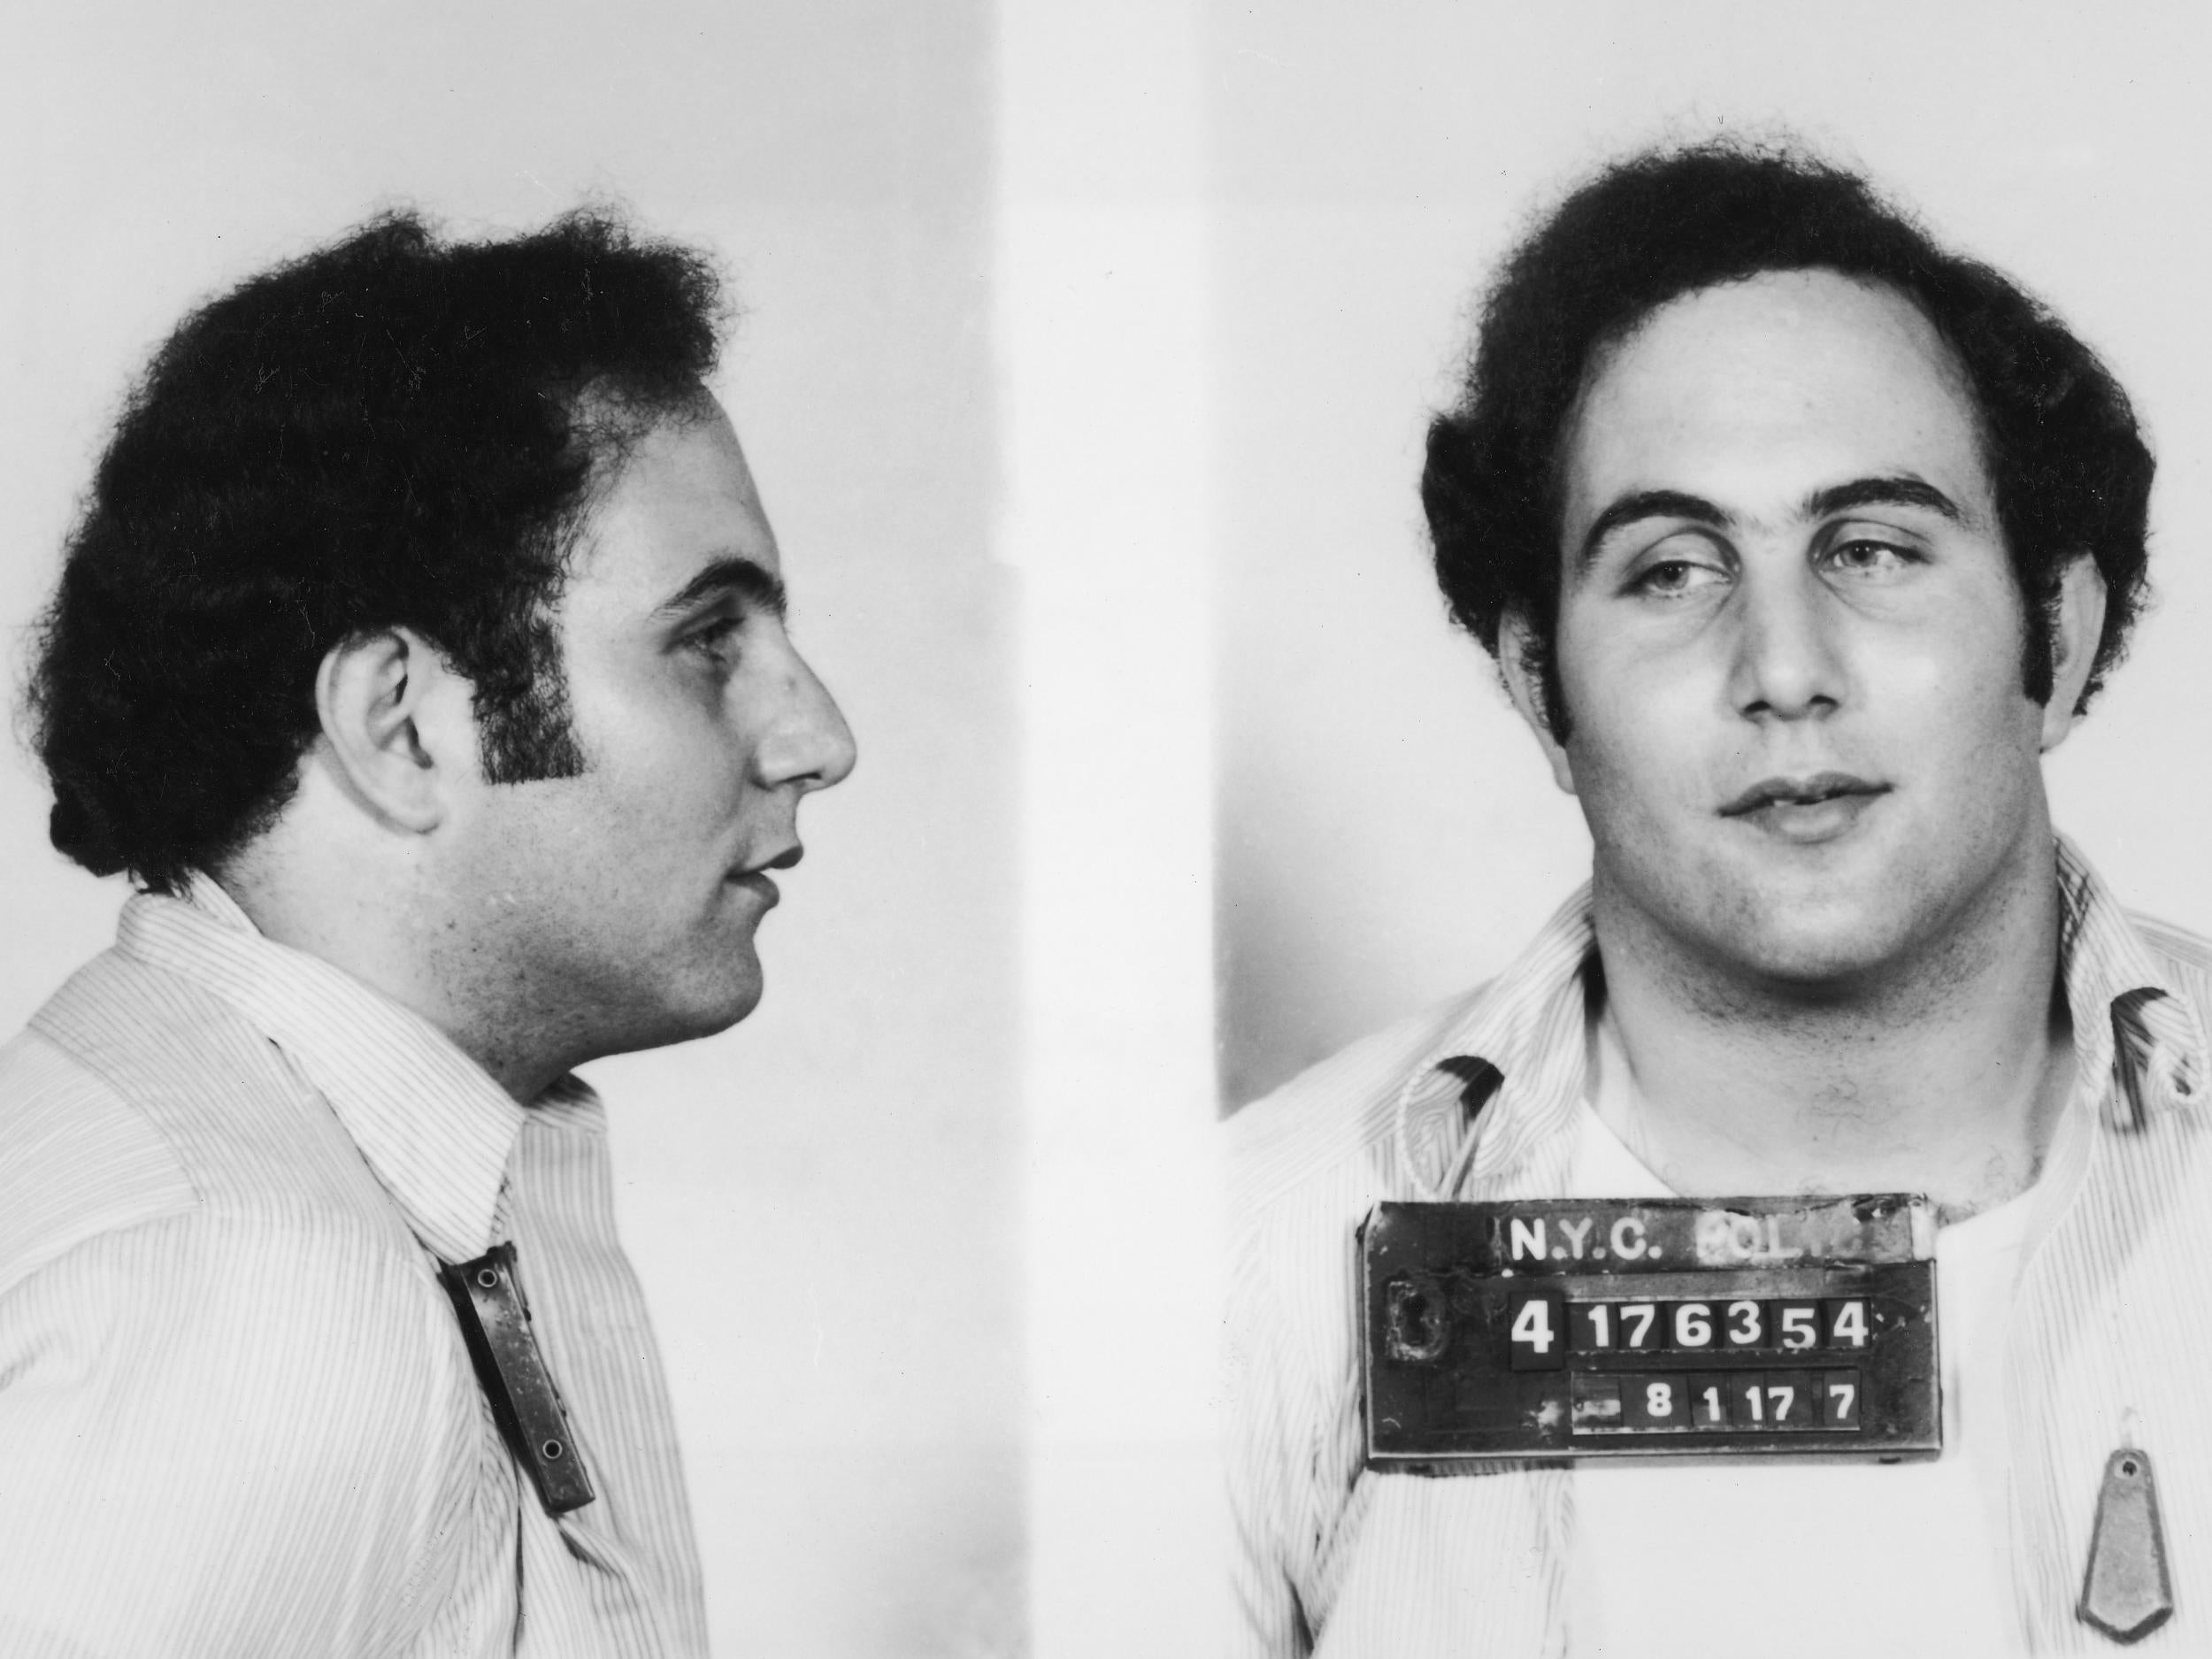 ‘Son of Sam’ killer, David Berkowitz, wrote letters addressed to detectives on the bodies of his victims, taunting pursuers